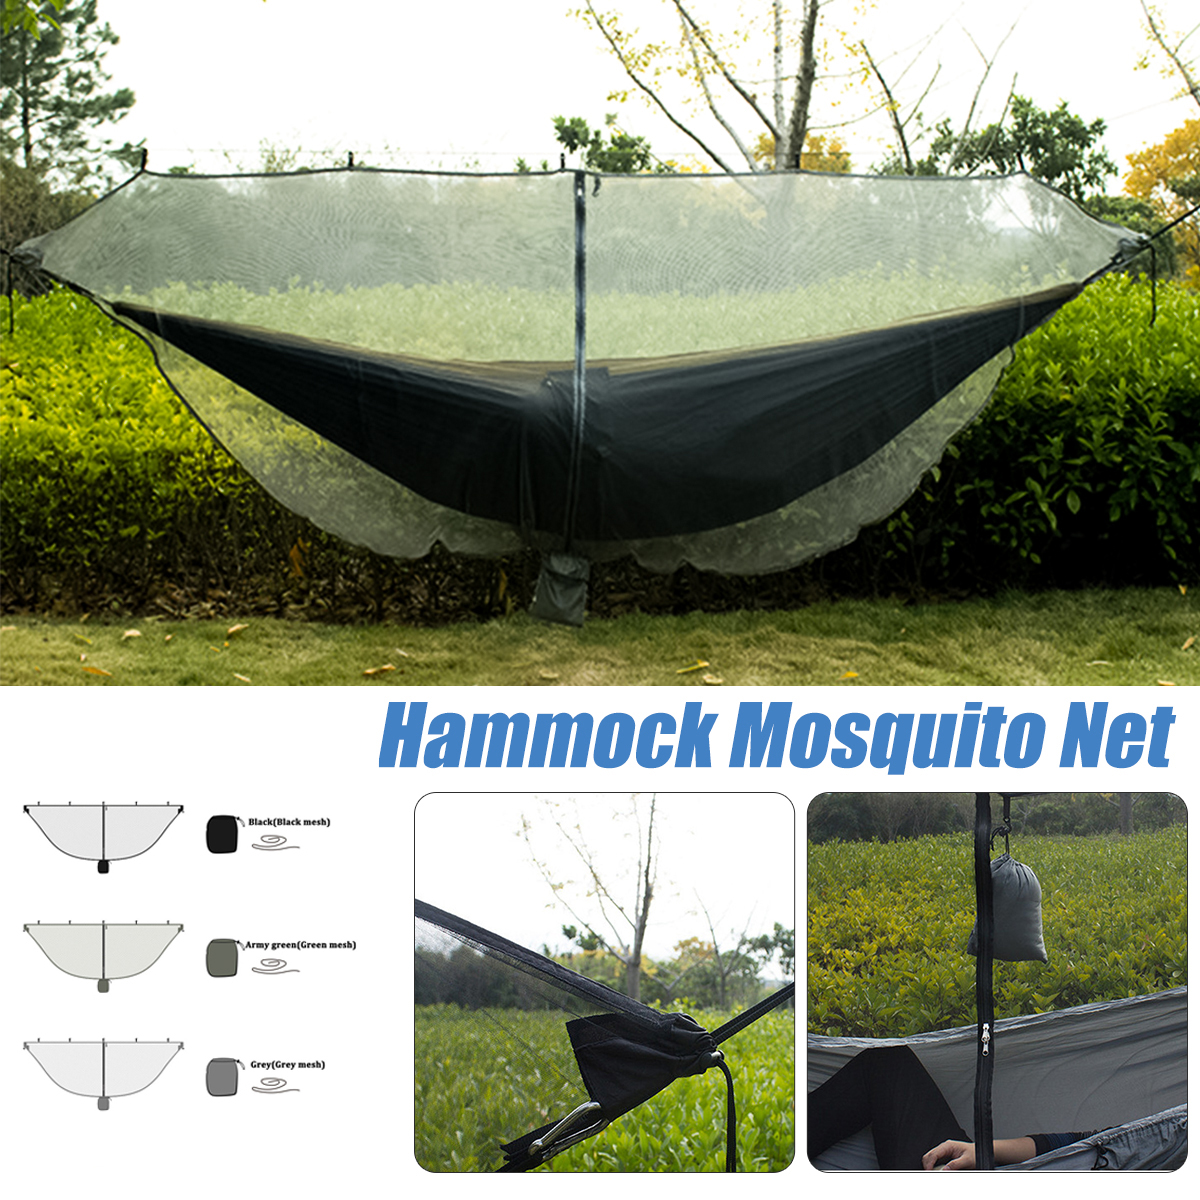 Outdoor-Portable-Hammock-Mosquito-Insect-Net-Camping-Swing-Bed-Gauze-Protection-1336853-2